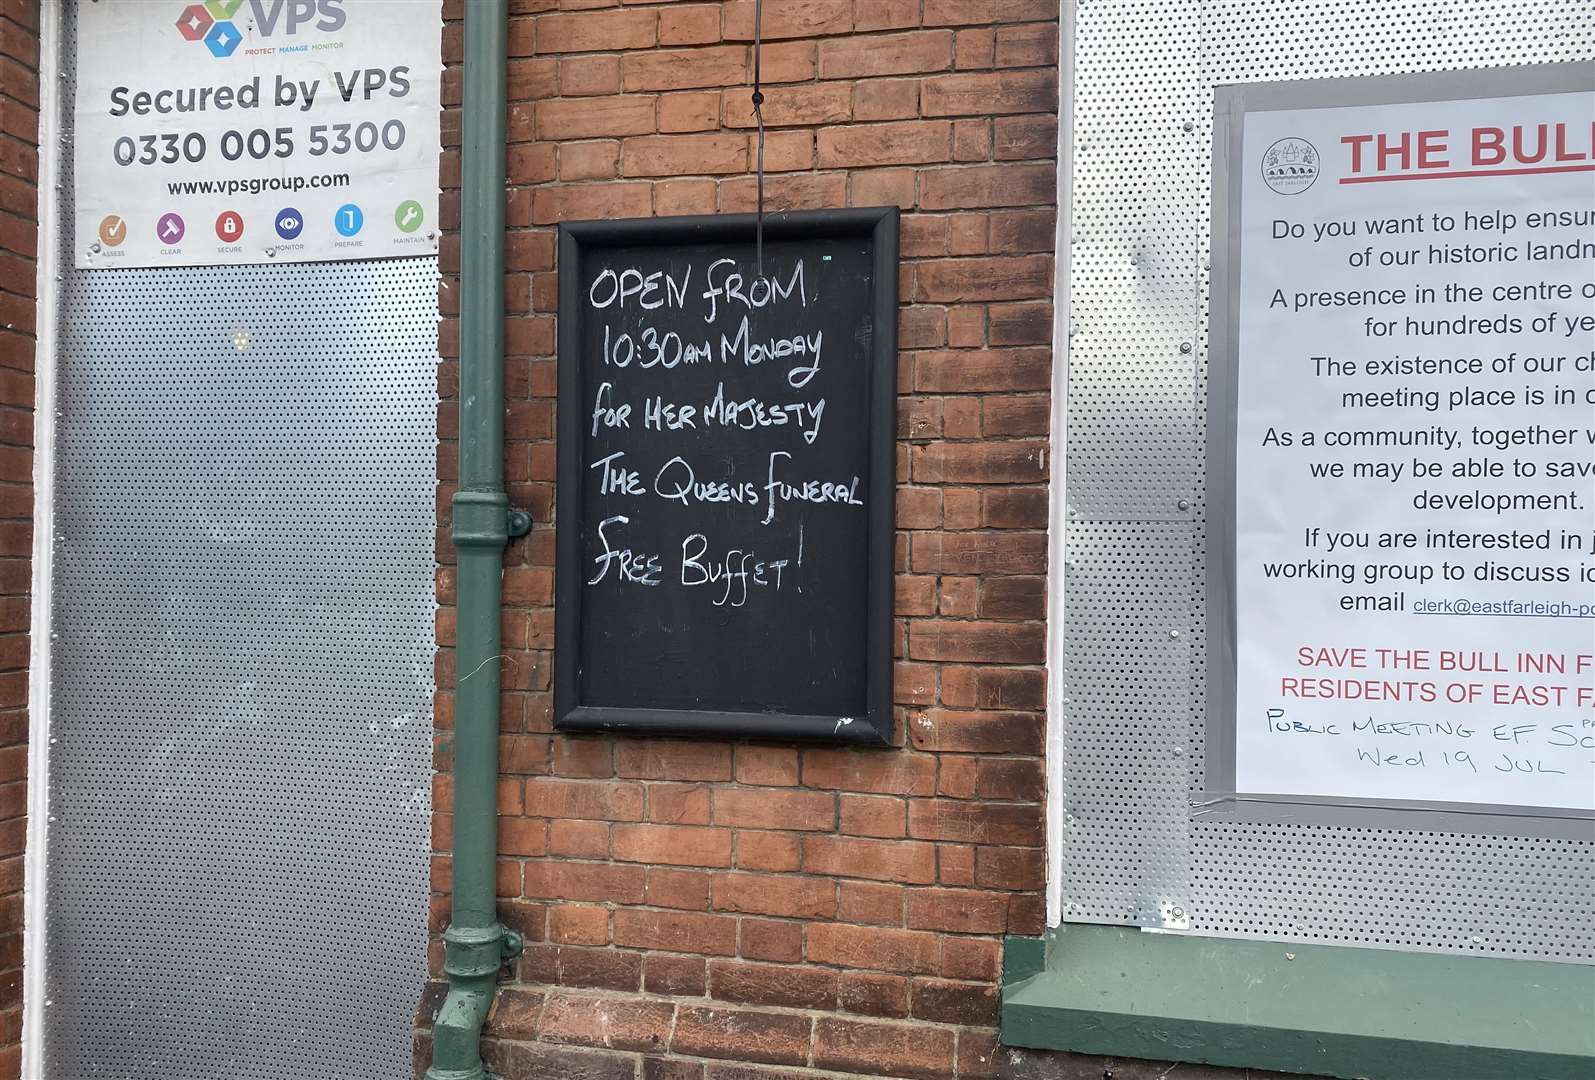 The last time the pub was open was September last year at the time of the Queen’s funeral